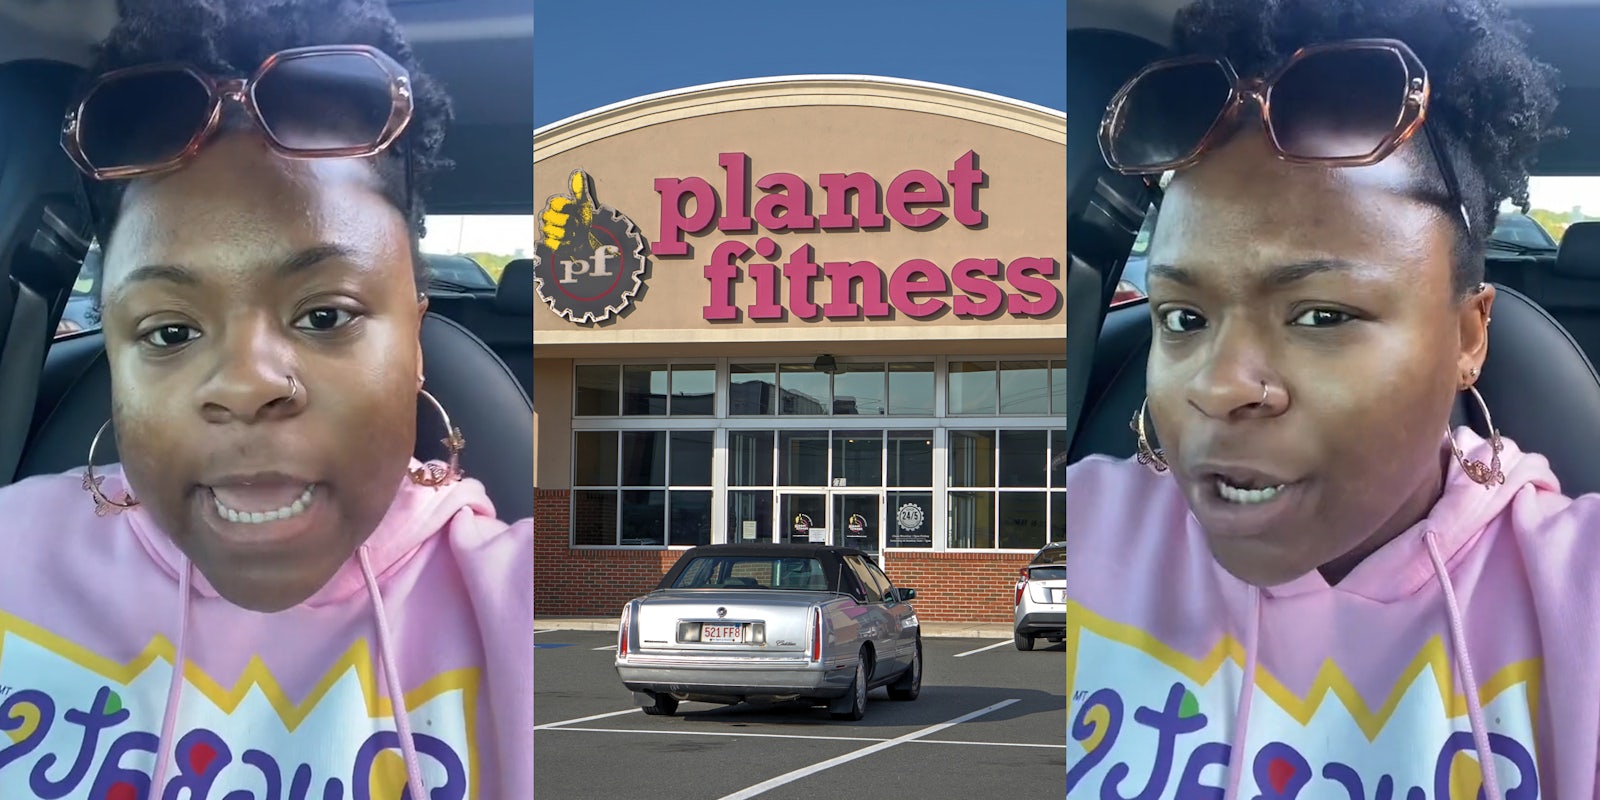 Job Applicant Calls Out Doing Multiple Interviews for Planet Fitness